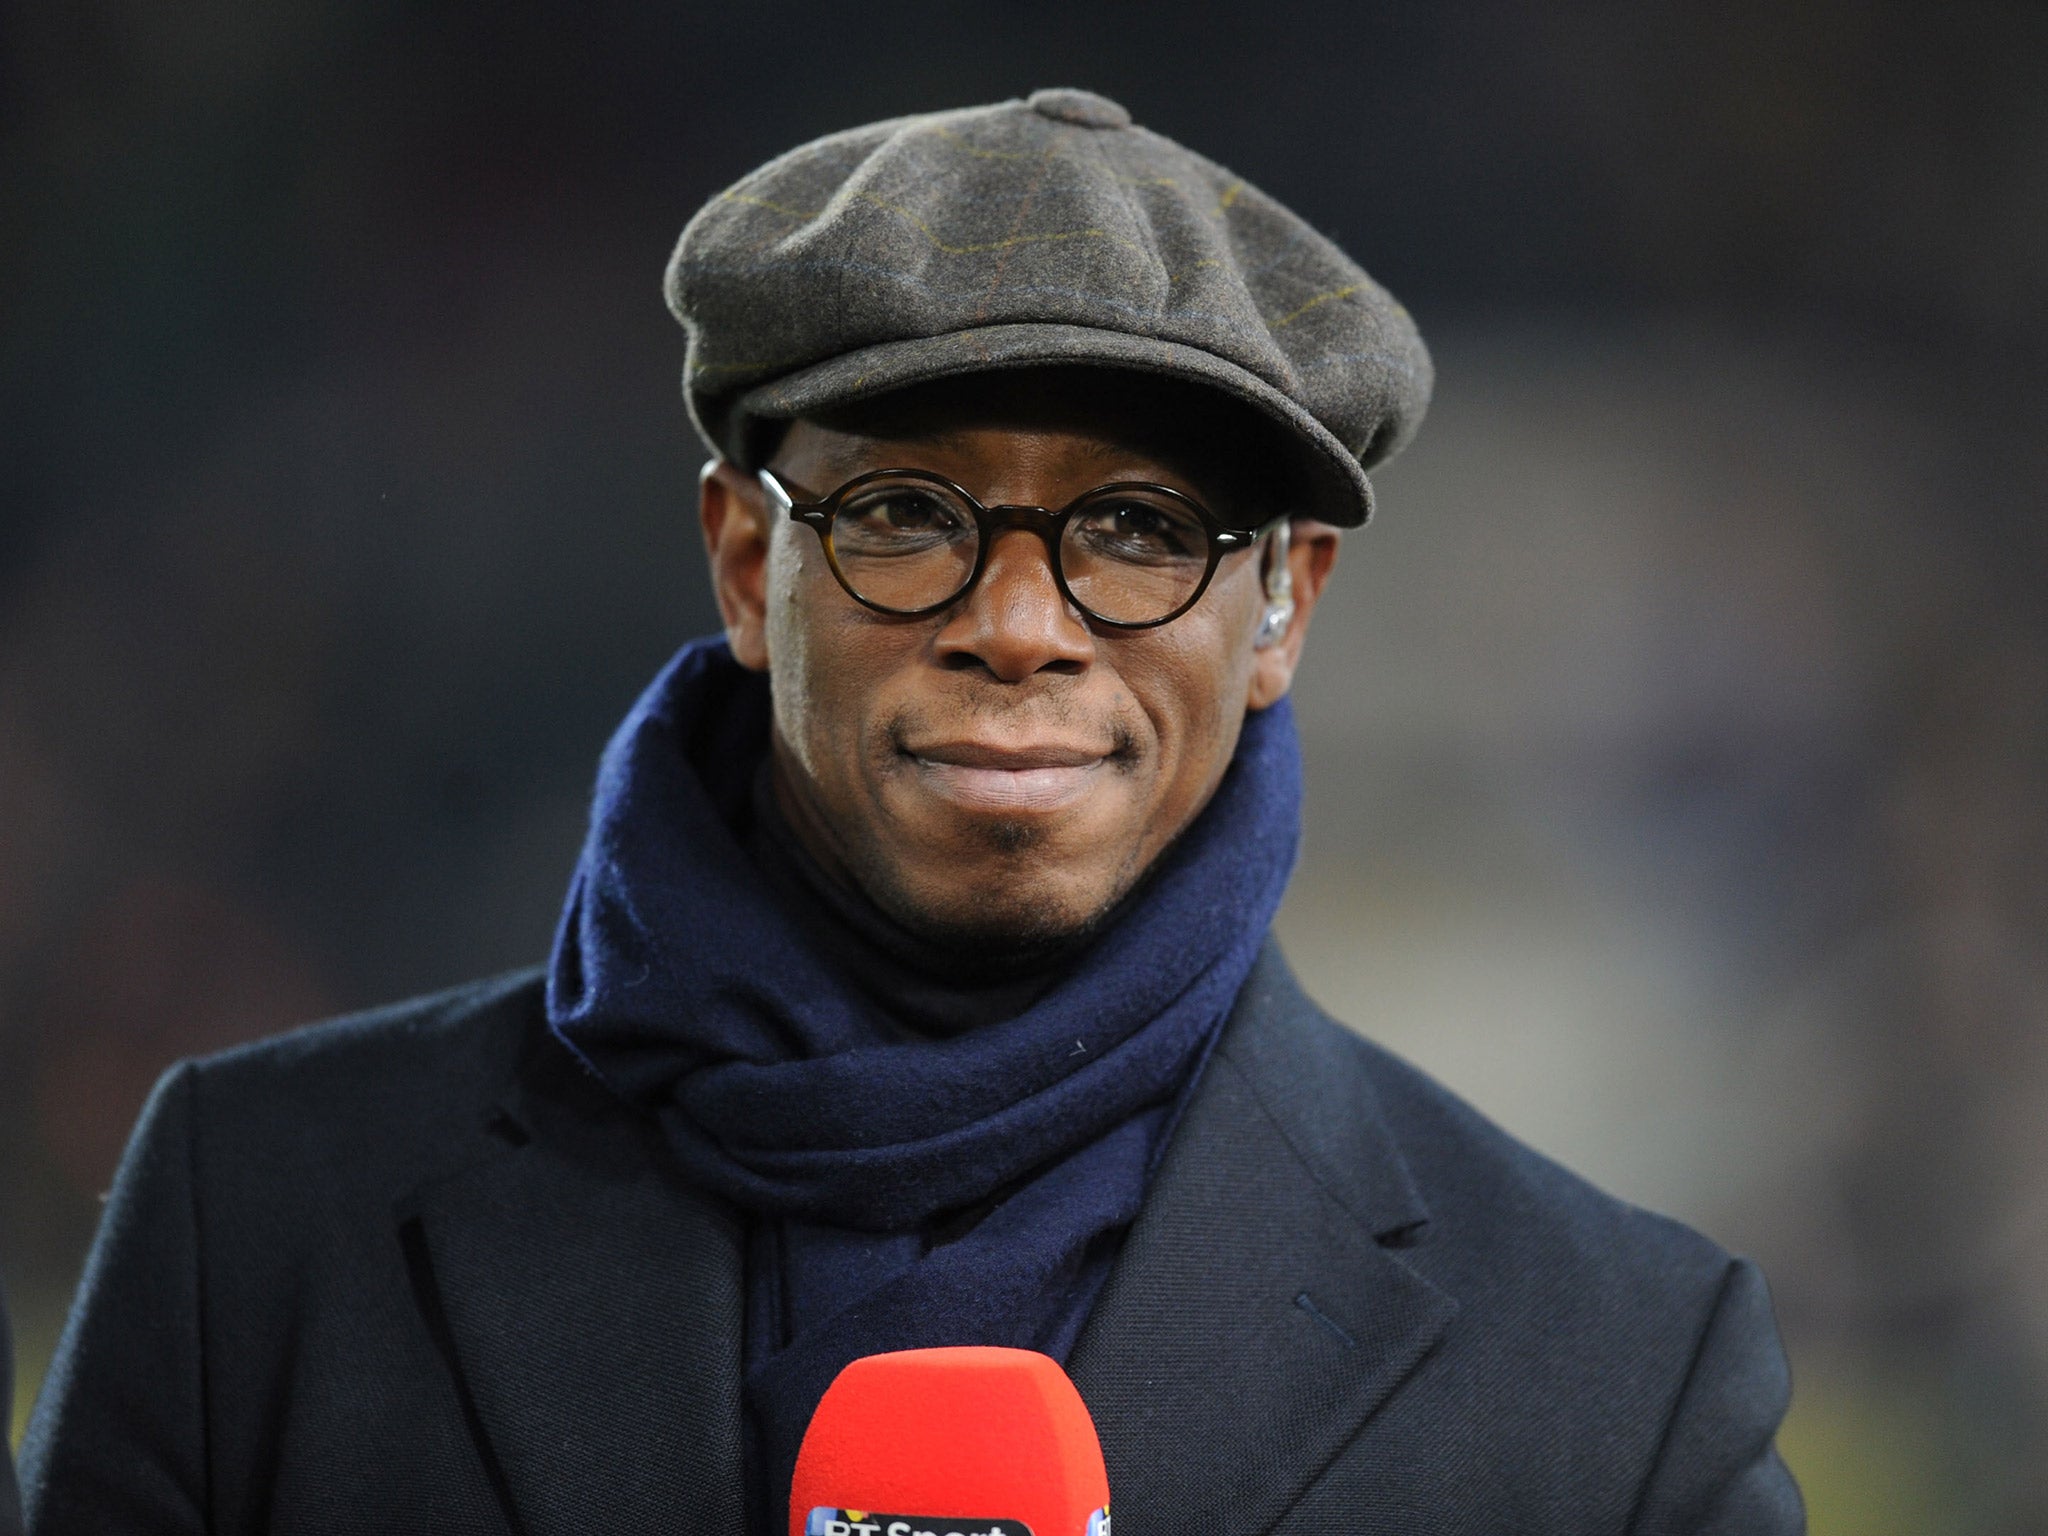 Ian Wright accused some former Arsenal players of 'letting down' Arsene Wenger